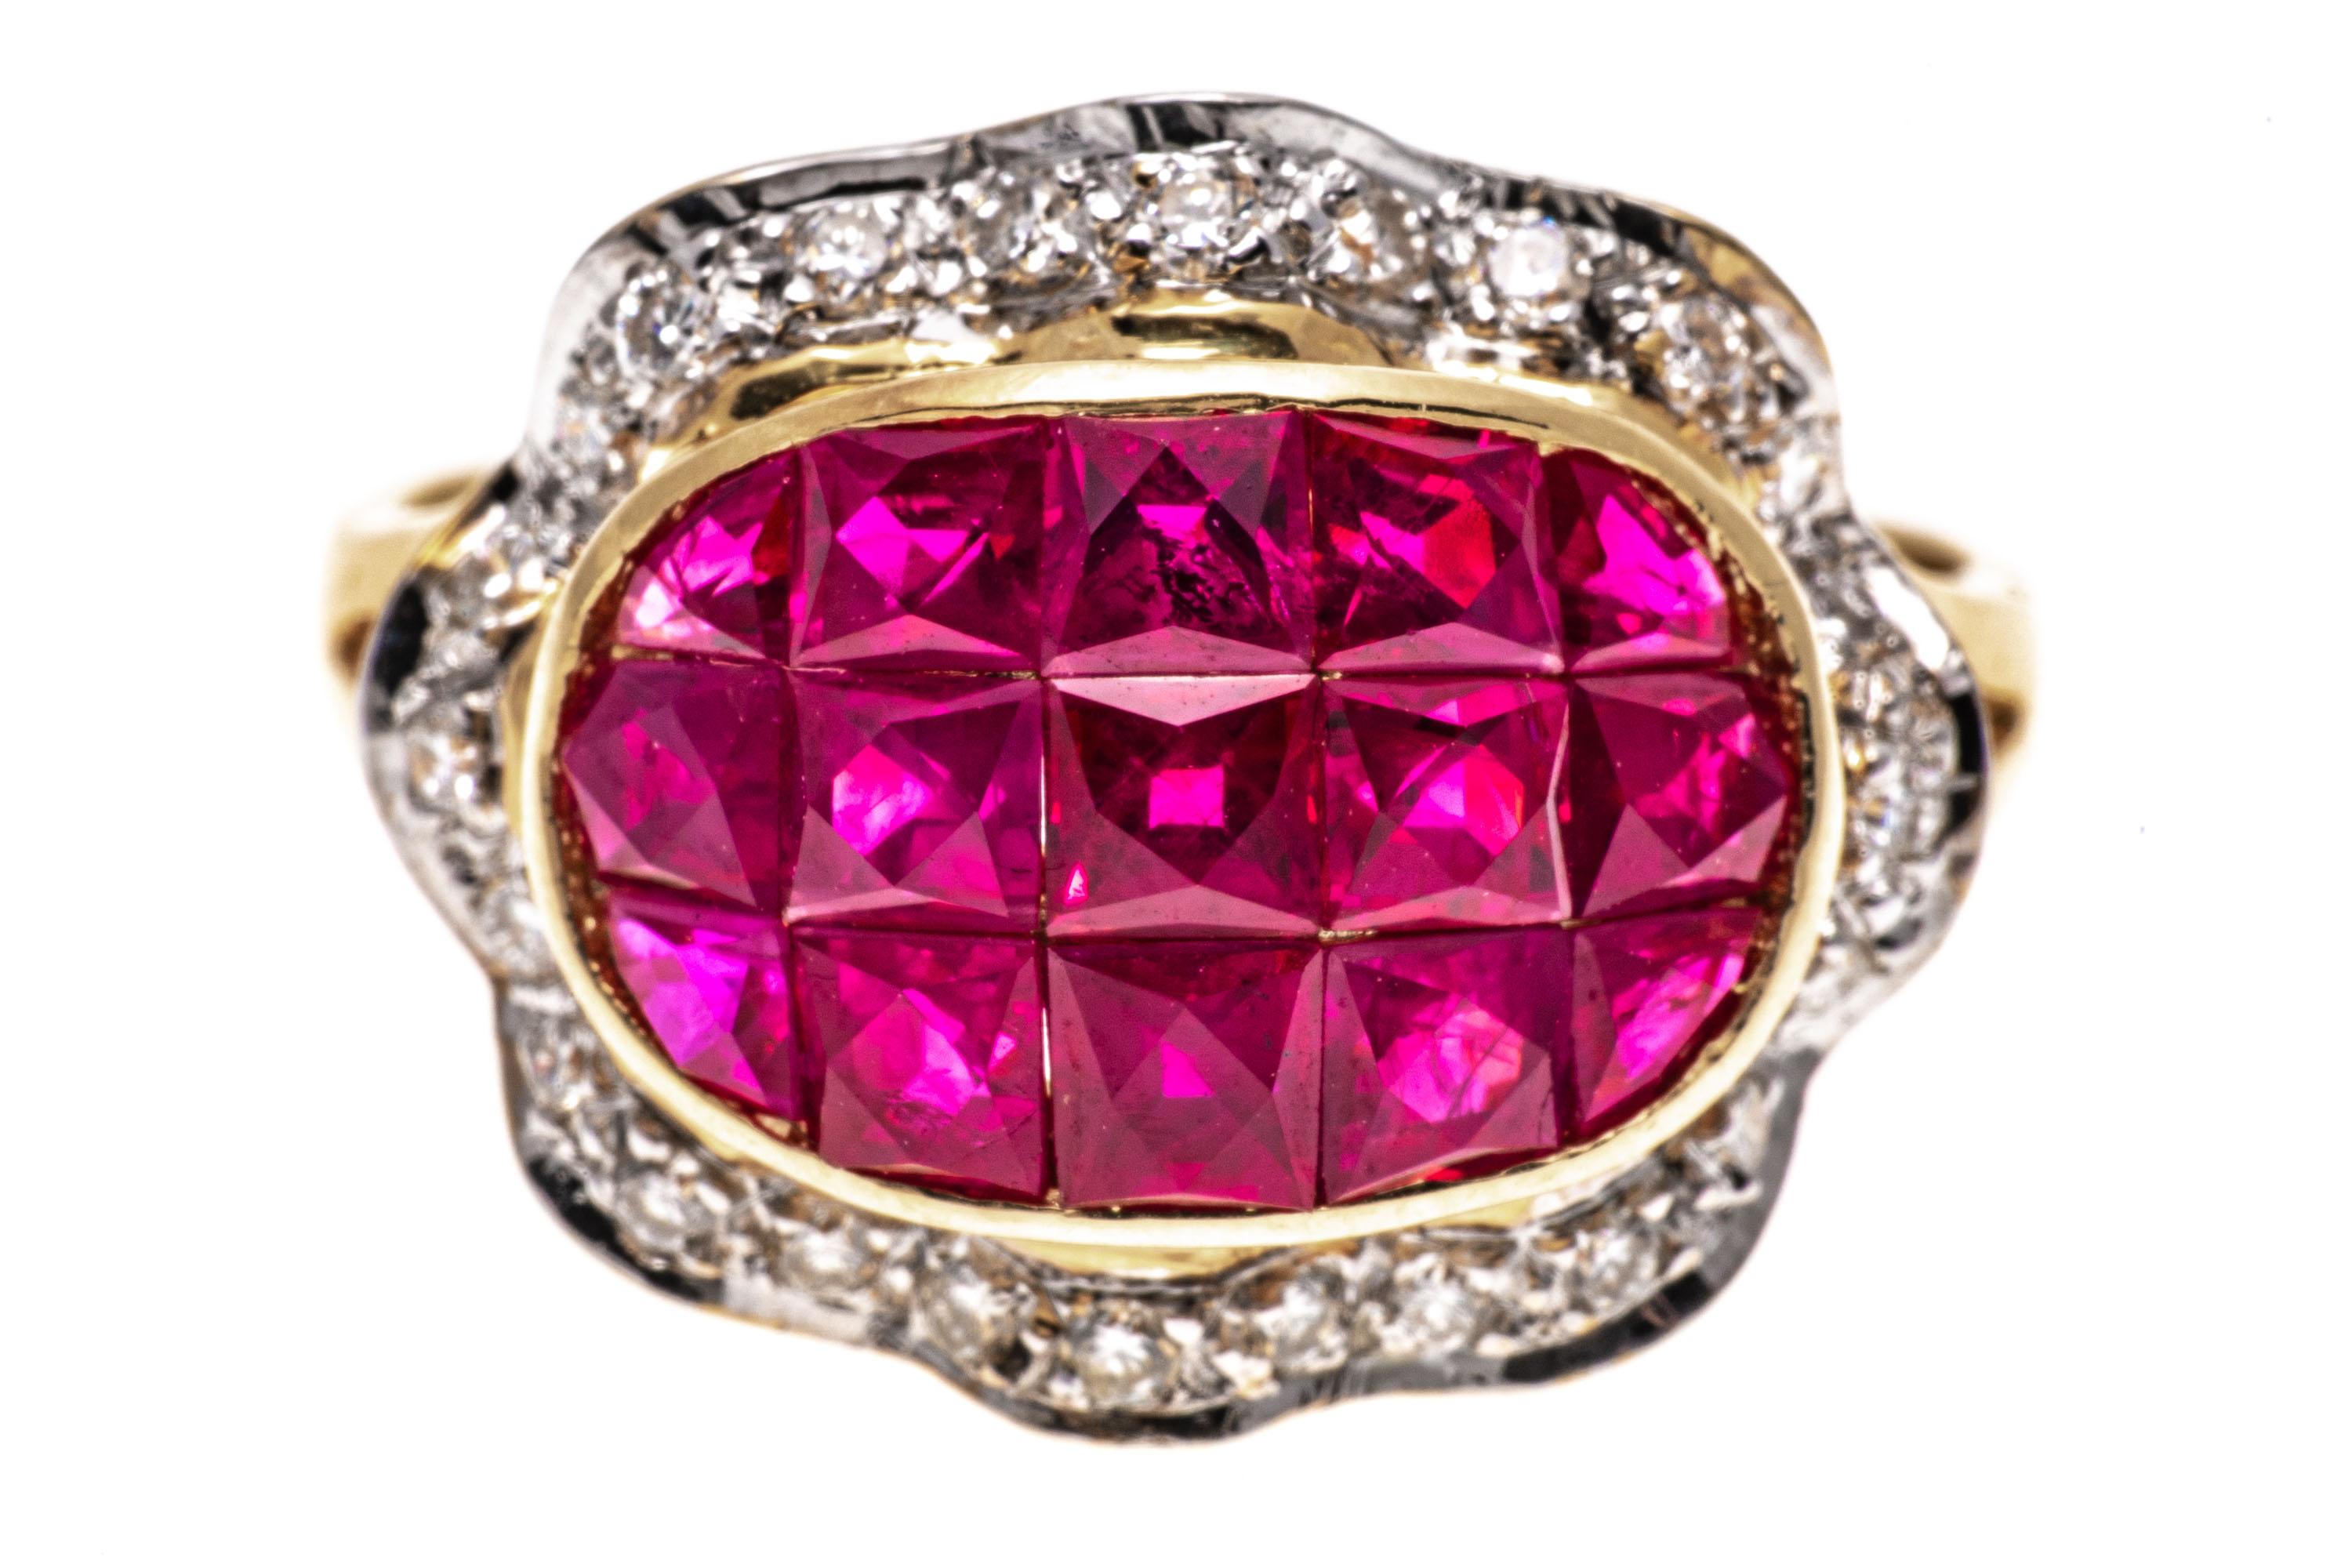 18k Yellow Gold Calibre Cut Ruby Ring With Ruffled Diamond Border, Size 7 For Sale 2